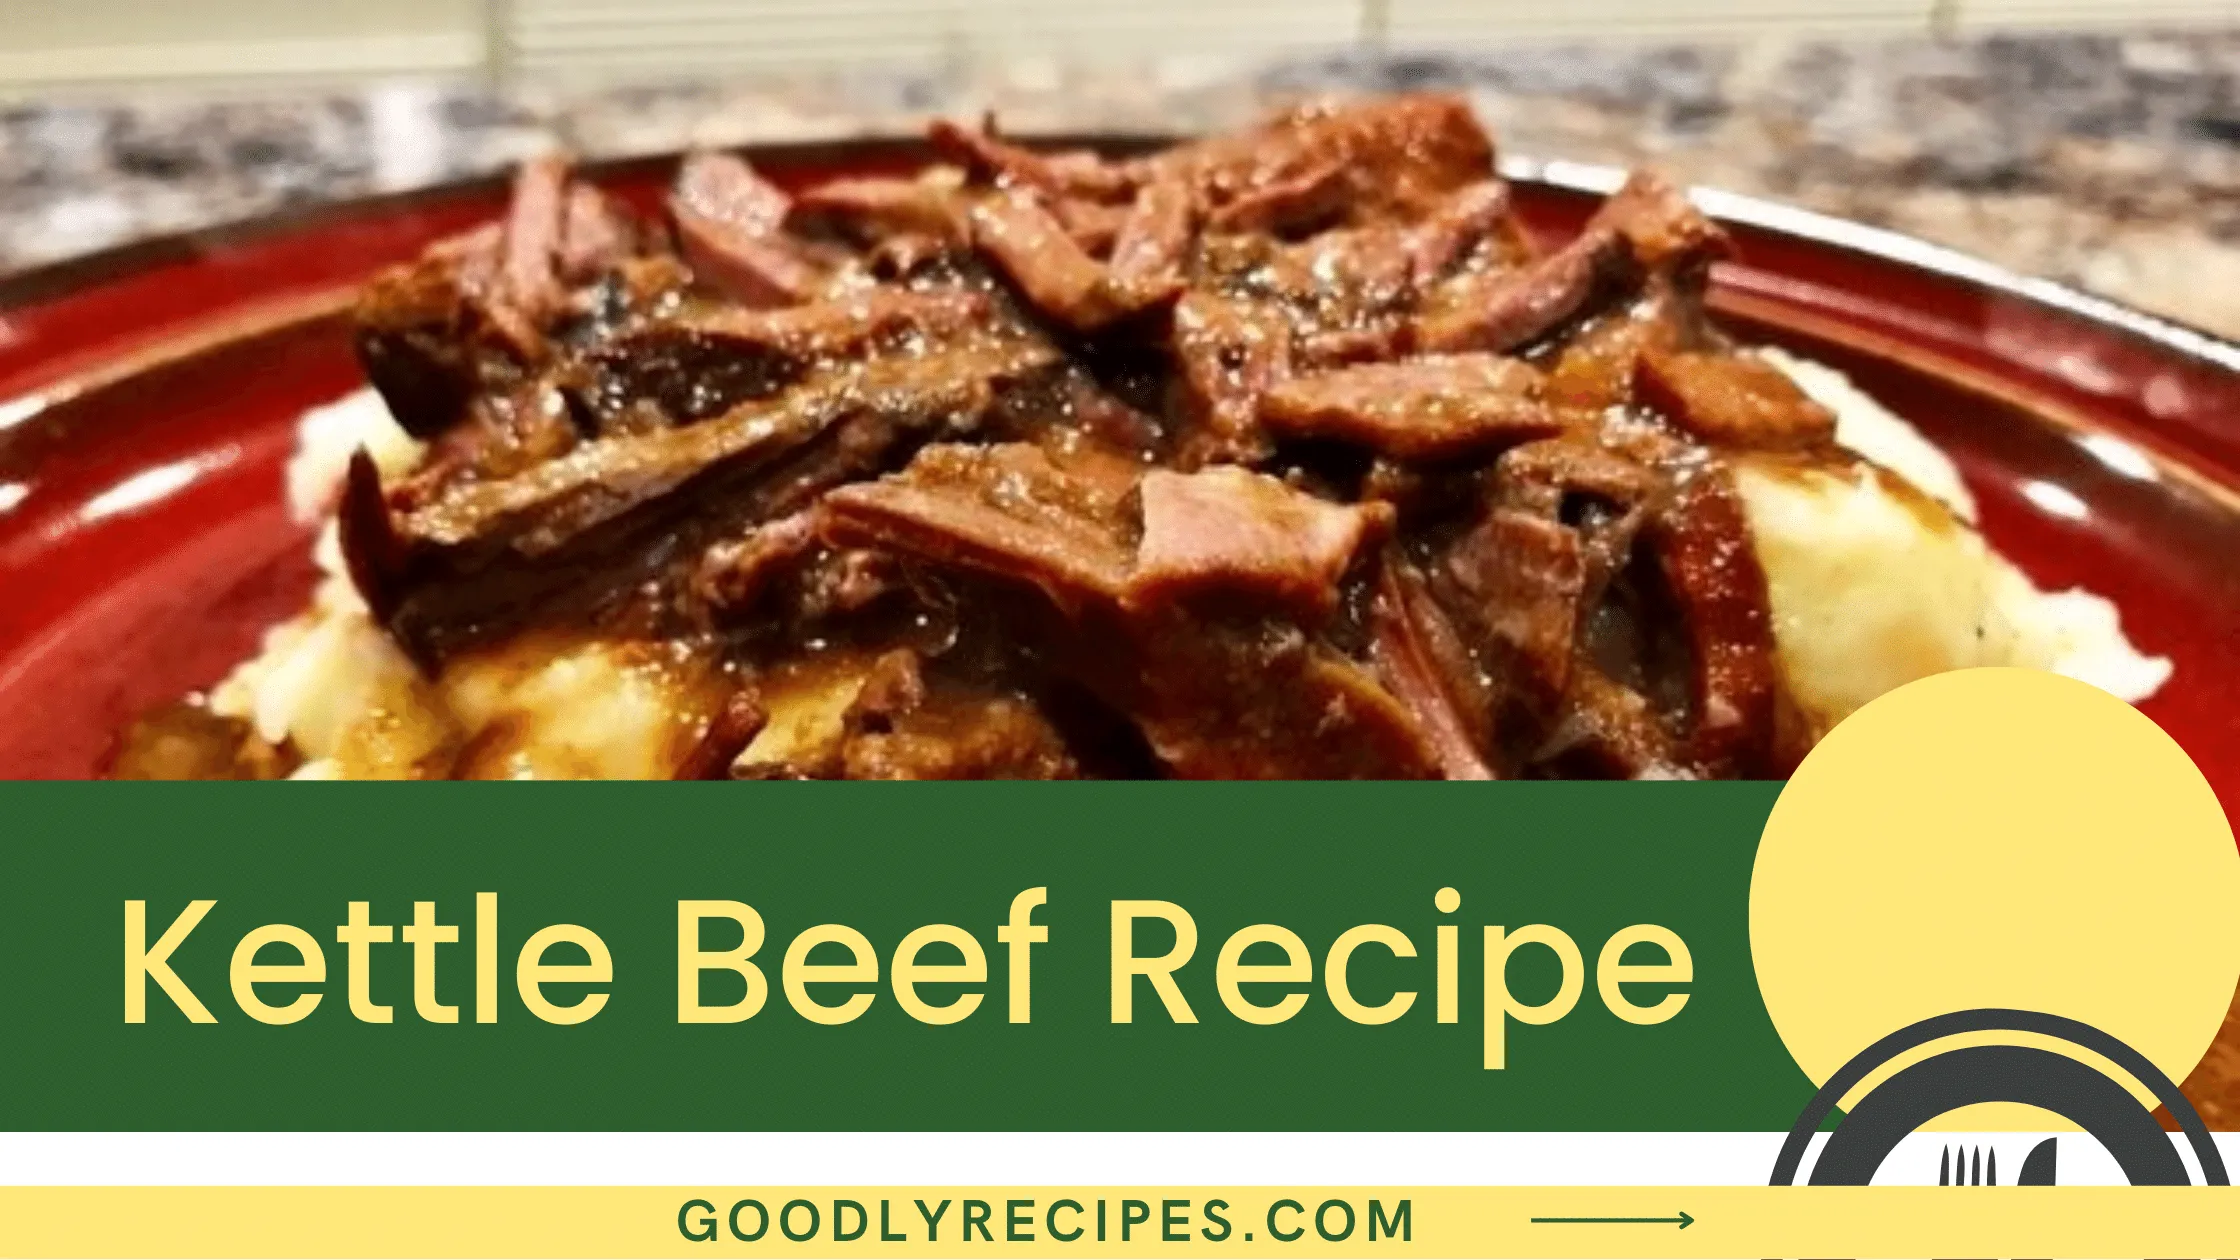 What is Kettle beef?